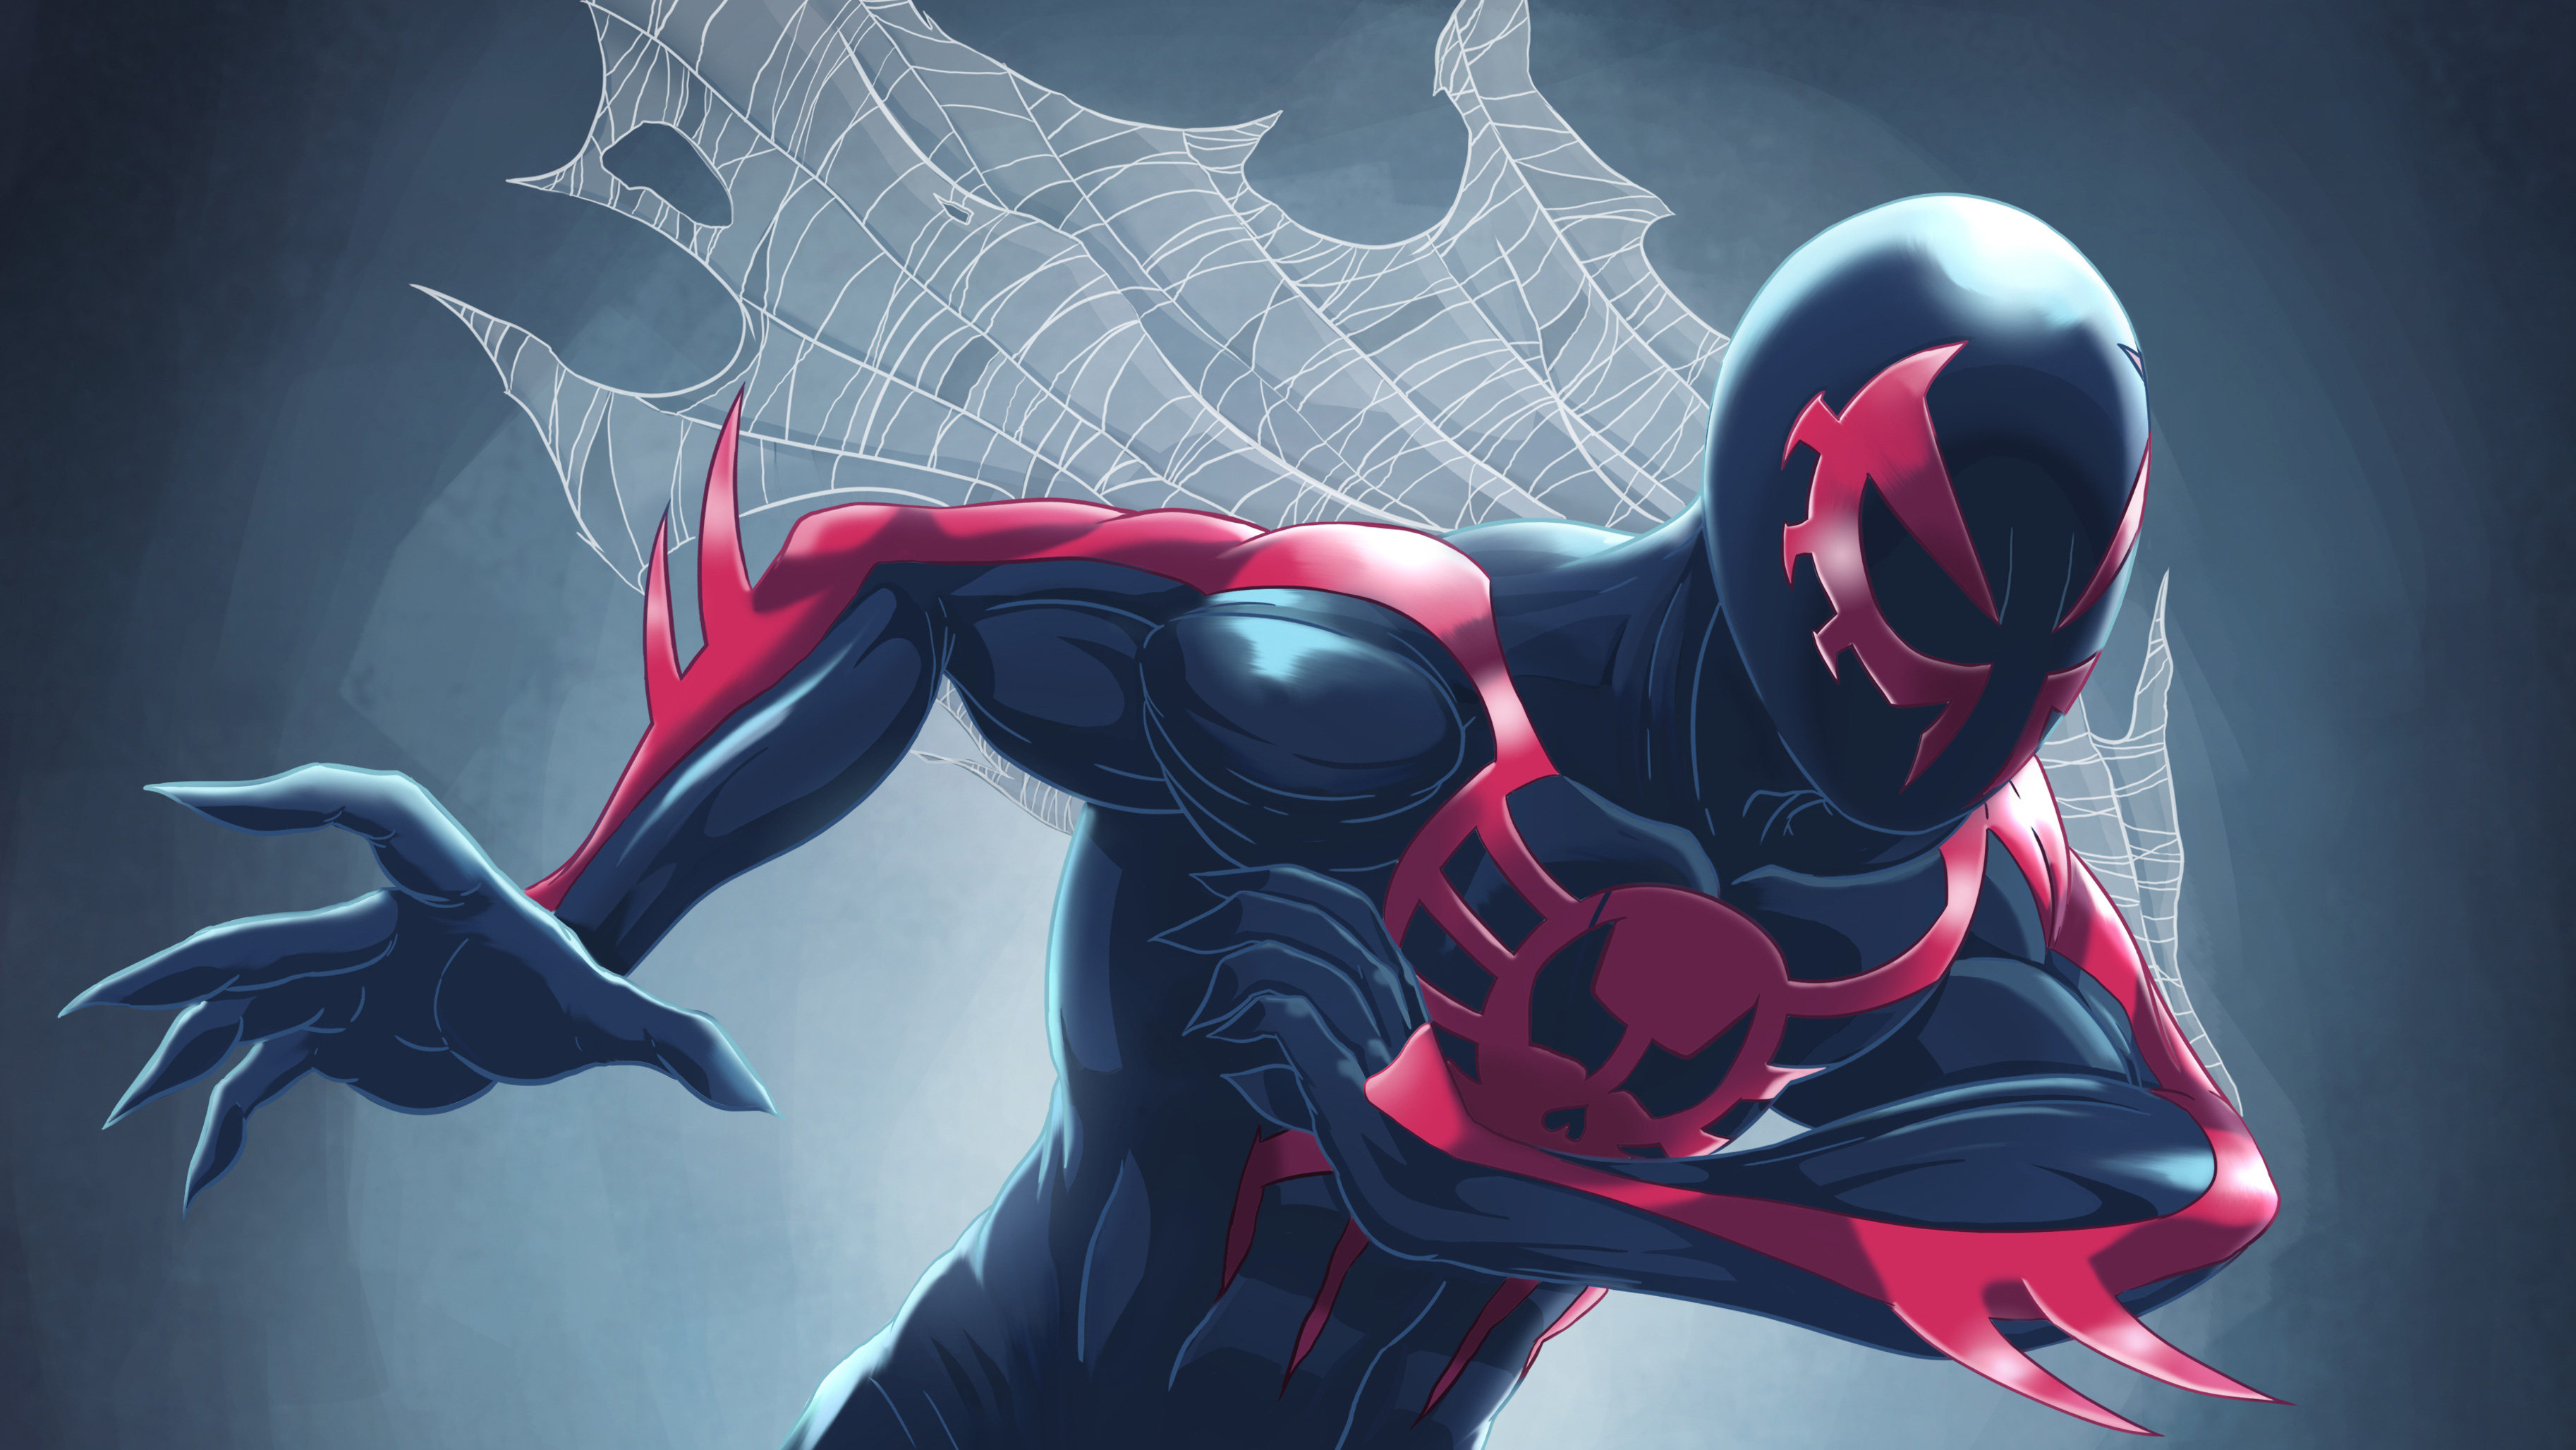 Spiderman 2099, HD Superheroes, 4k Wallpapers, Images, Backgrounds.